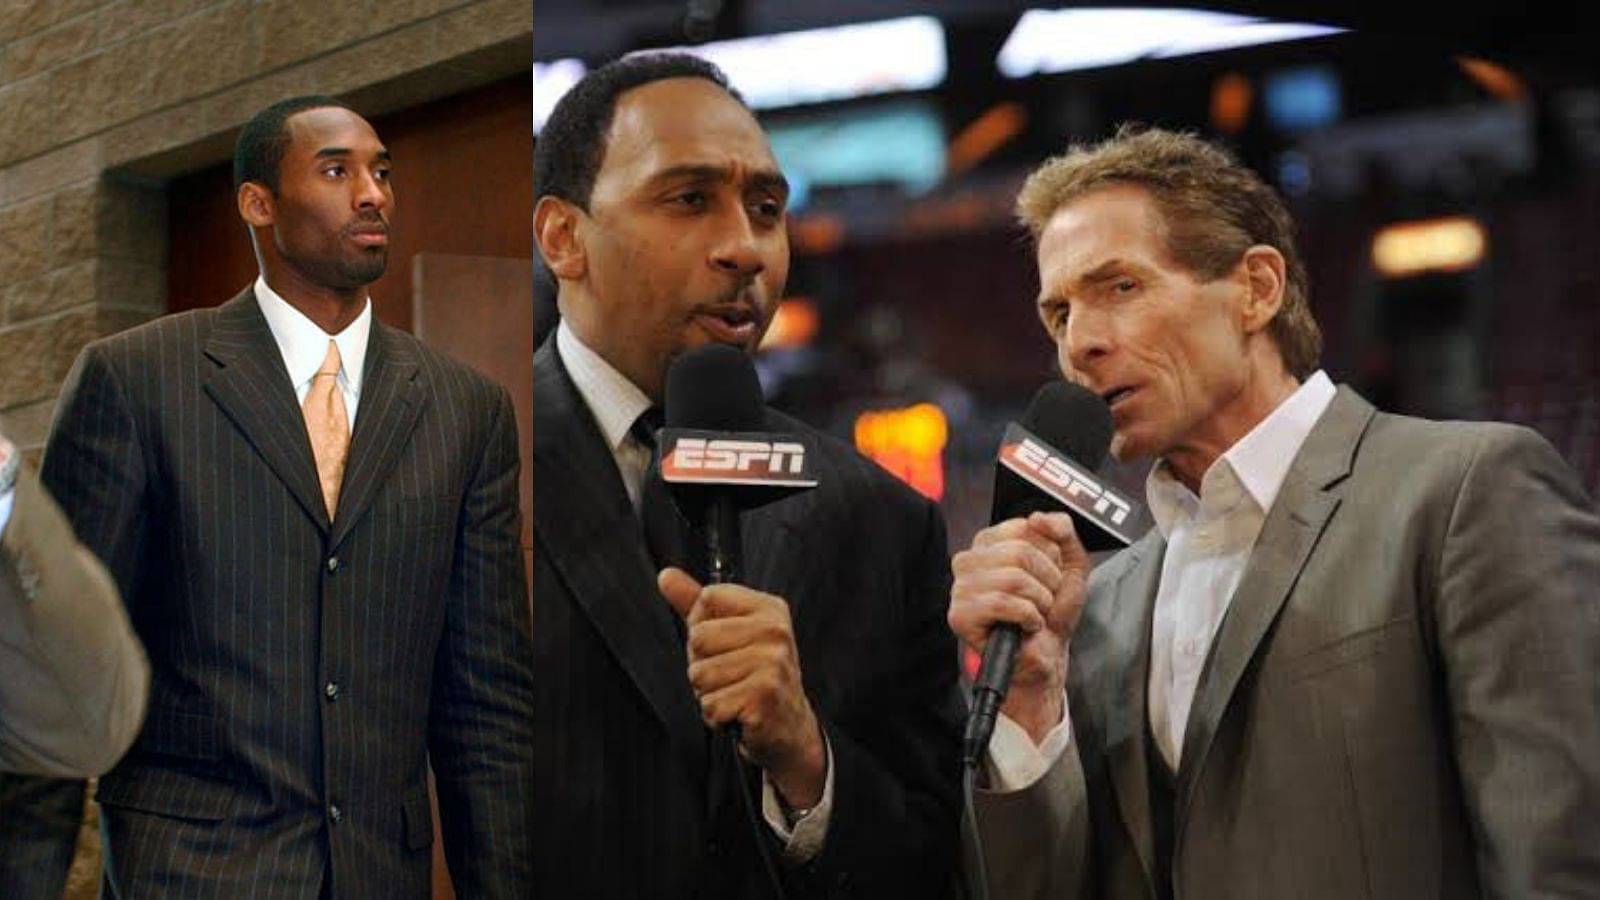 Skip Bayless claimed $600 million worth Kobe Bryant 's shoes sold better because of s*xual assault case